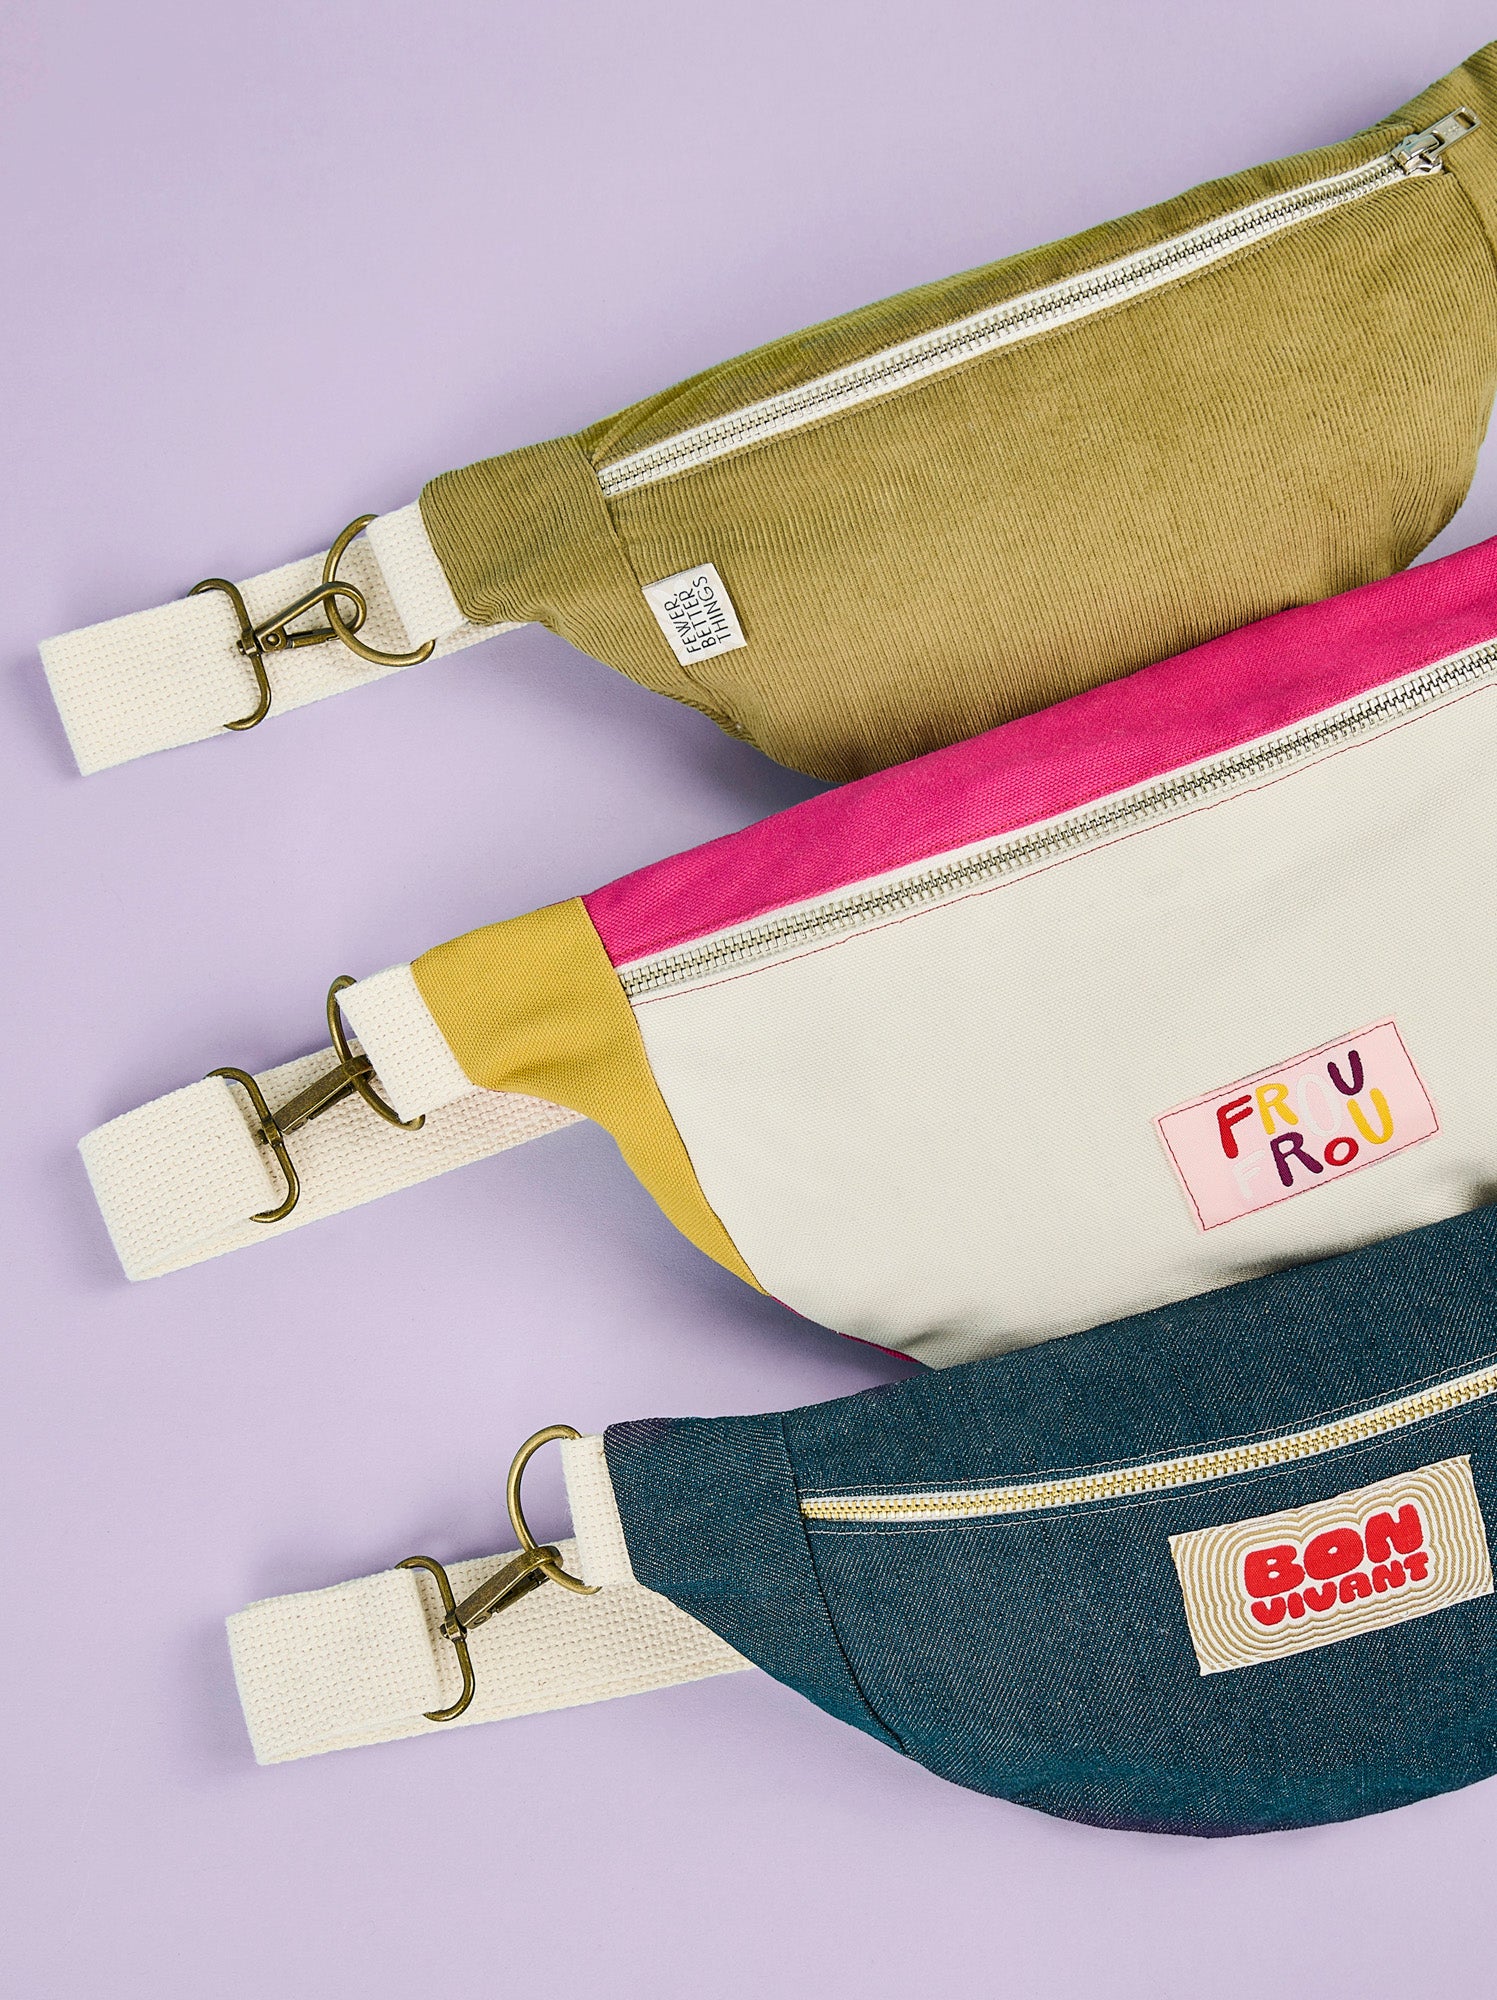 Sew a Crossbody Bag with our Free Belt Bag Pattern!